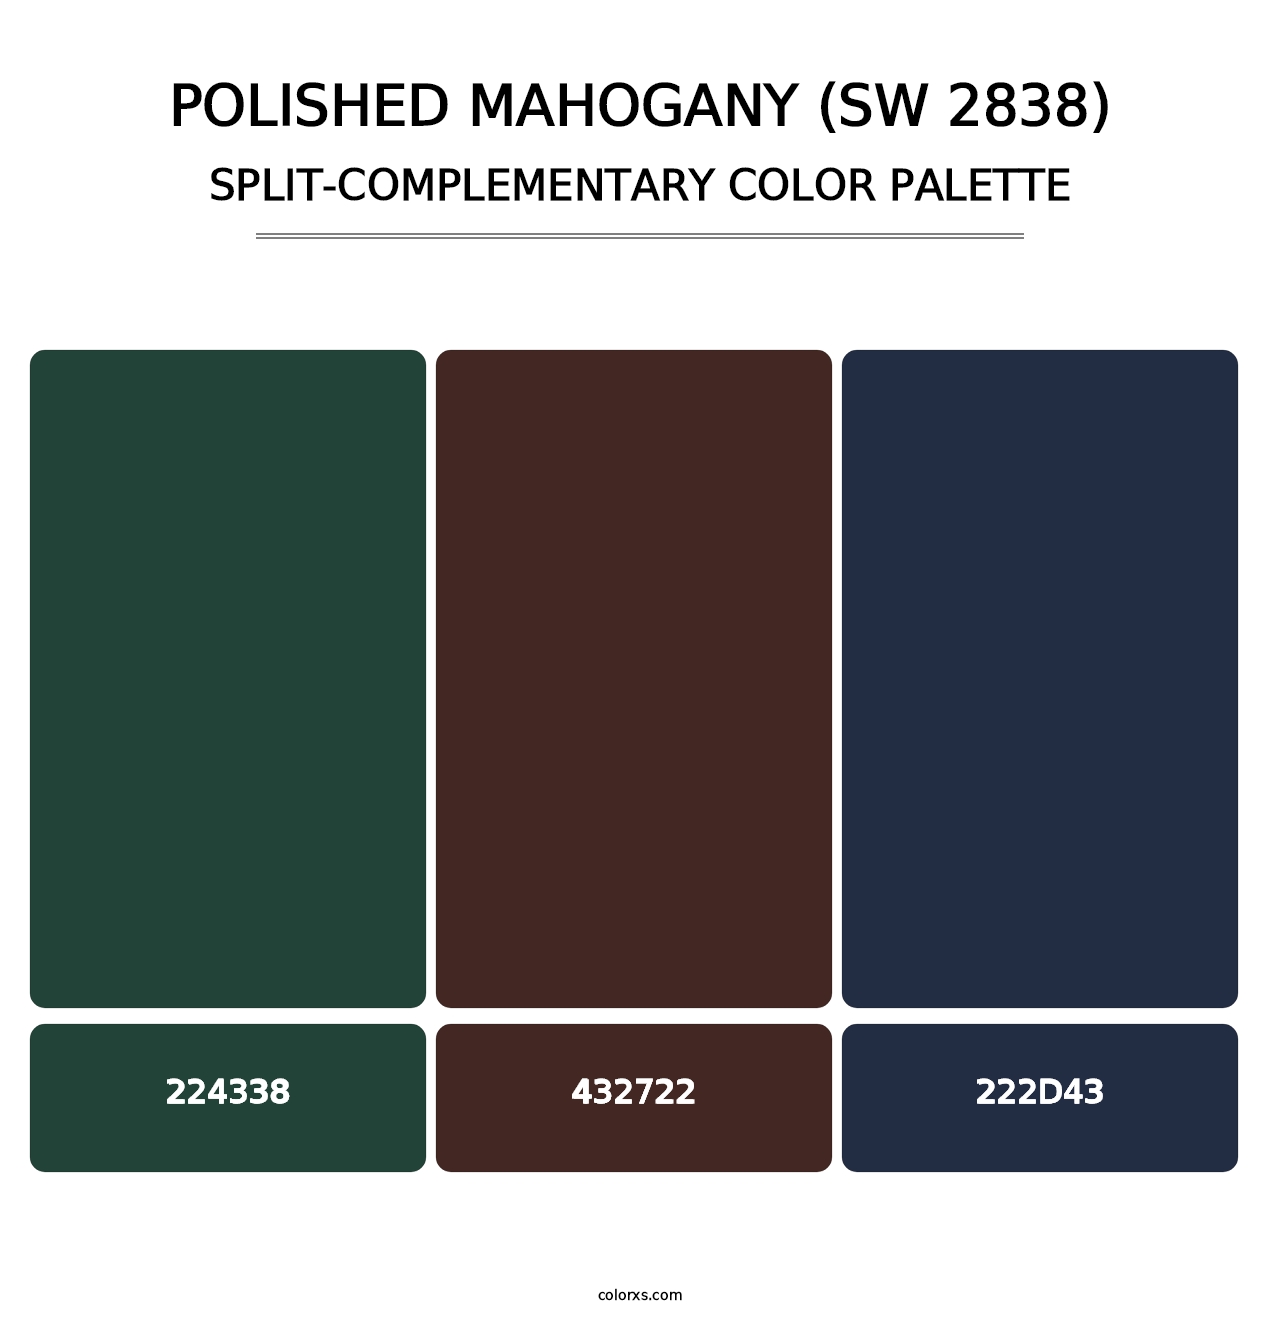 Polished Mahogany (SW 2838) - Split-Complementary Color Palette